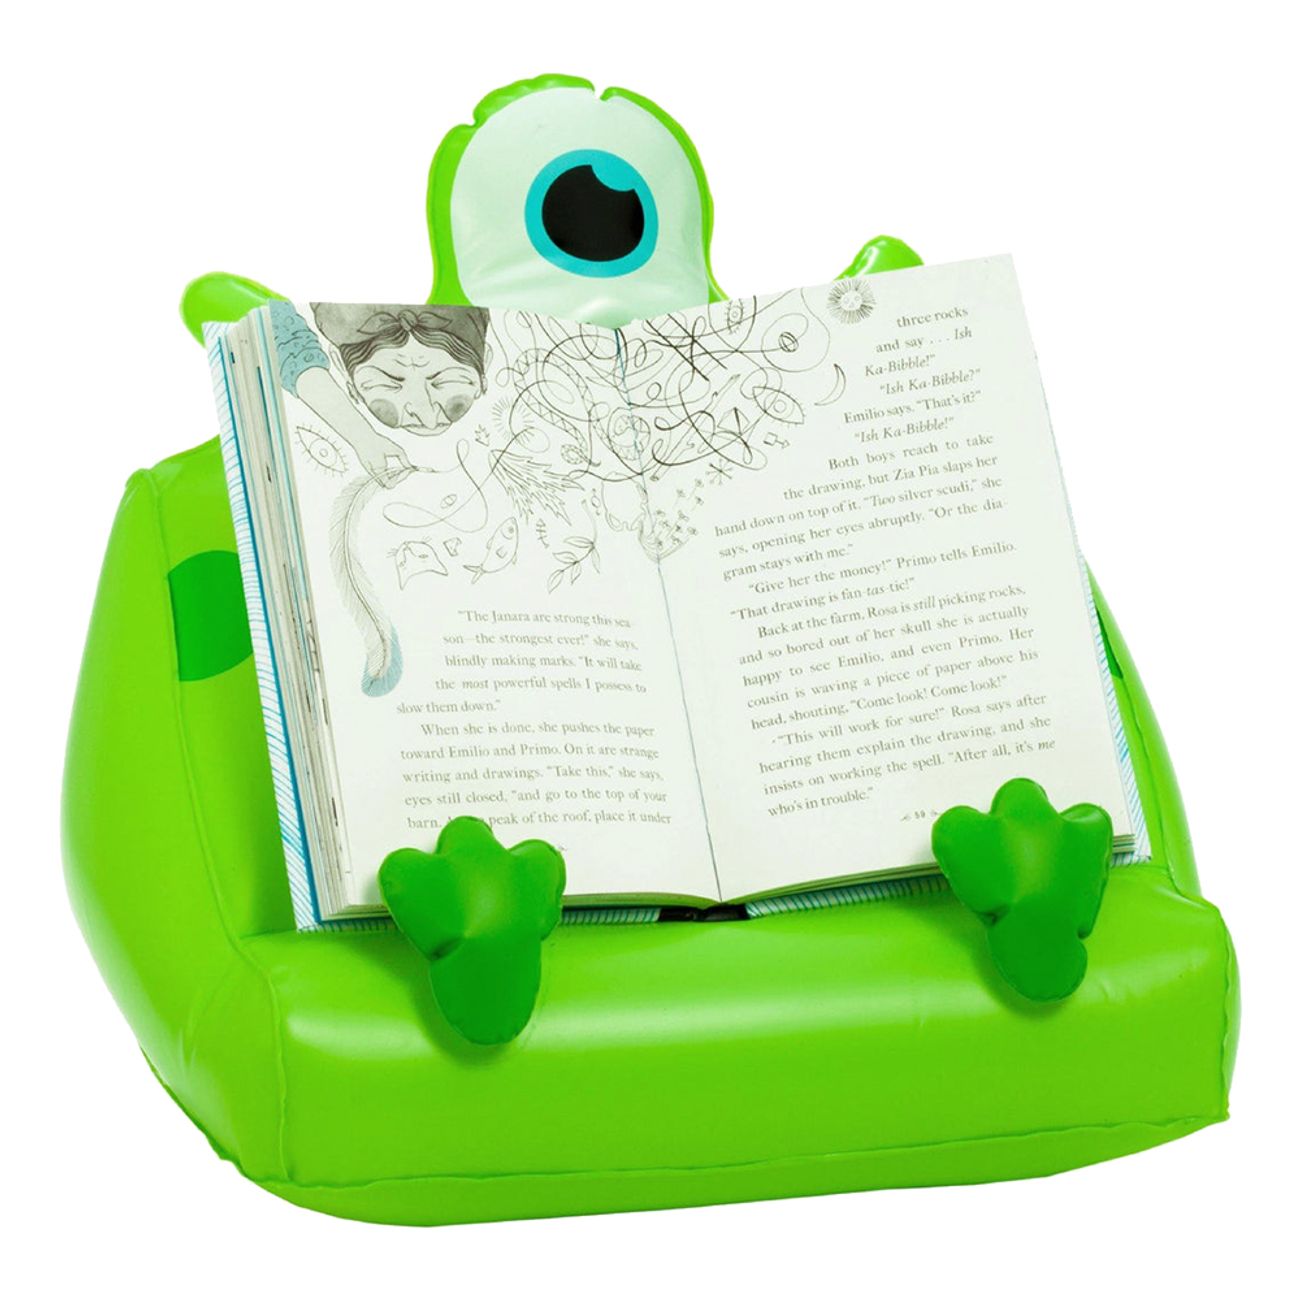 bookmonster-air-percy-two-teeth-95422-2